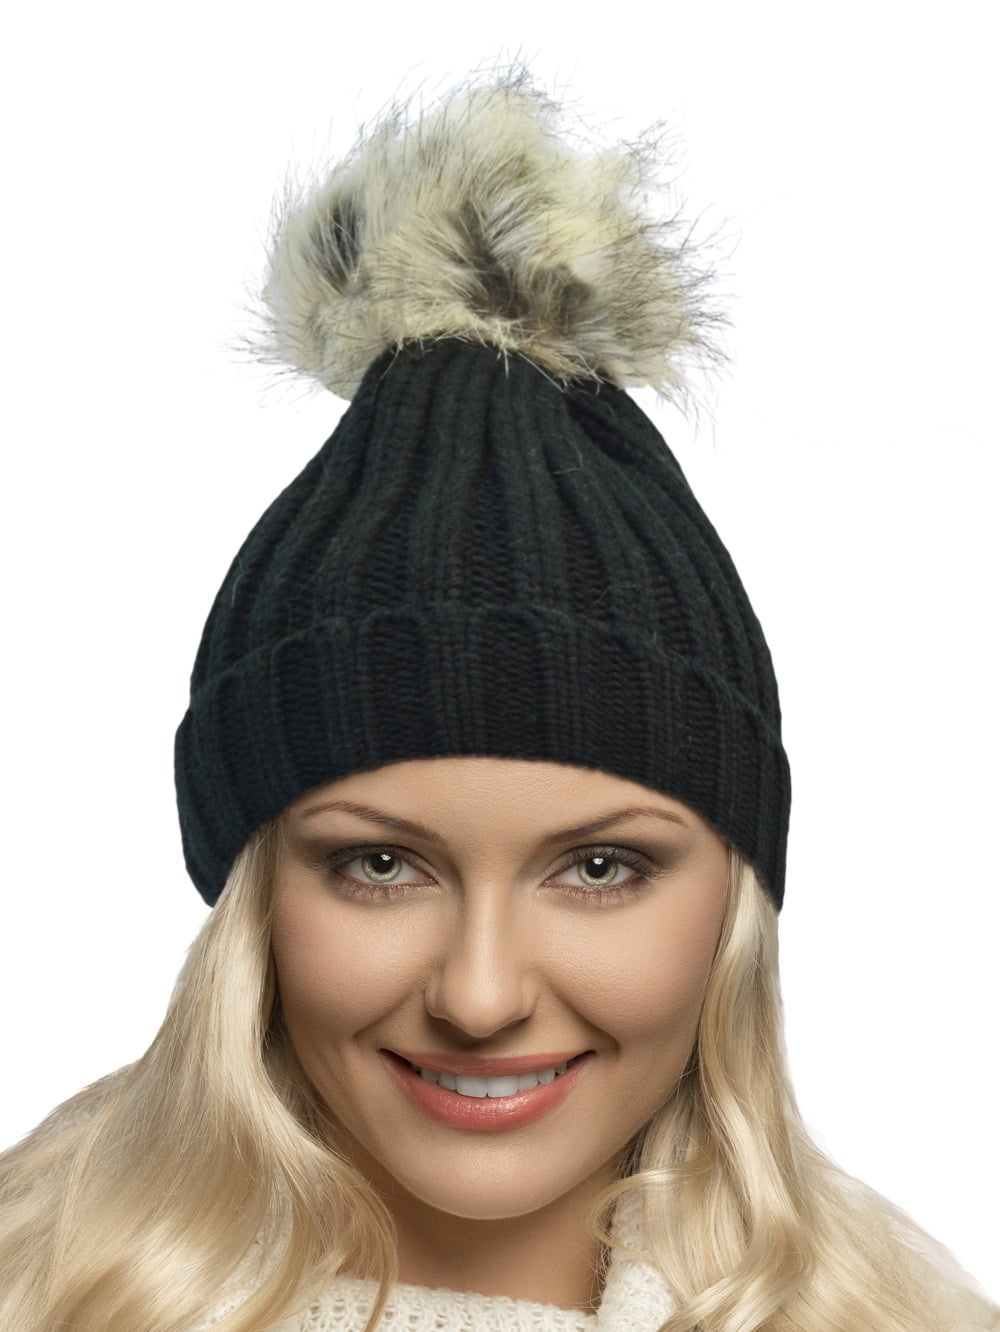 Hand knitted hat with faux fur pompom.Adultteen